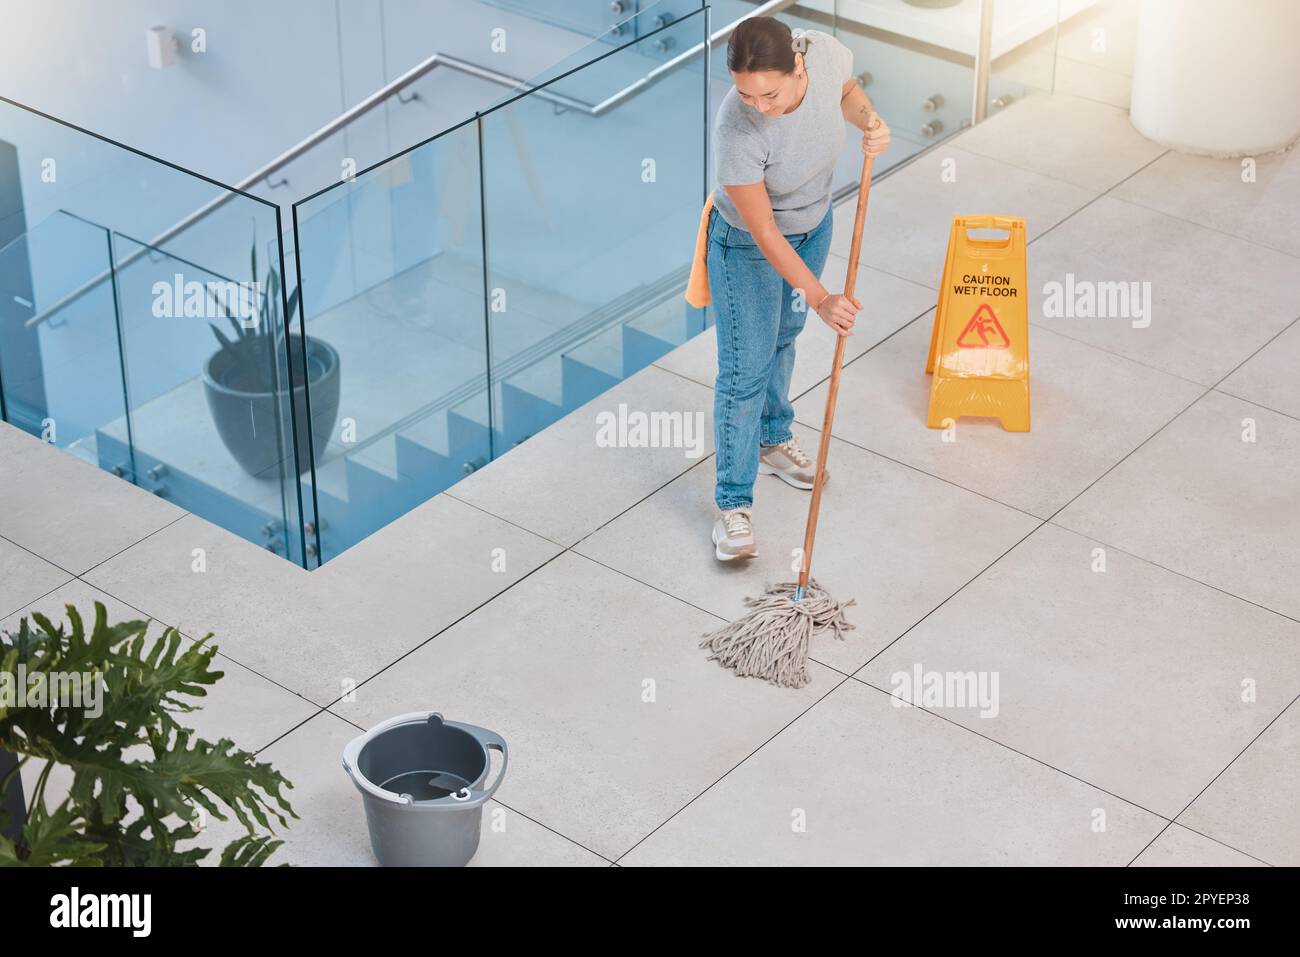 Cleaning service, office building or woman mopping floor with warning sign for job safety compliance. Bucket, bacteria or girl cleaner working on wet floor for dirty, messy or dusty tiles on ground Stock Photo